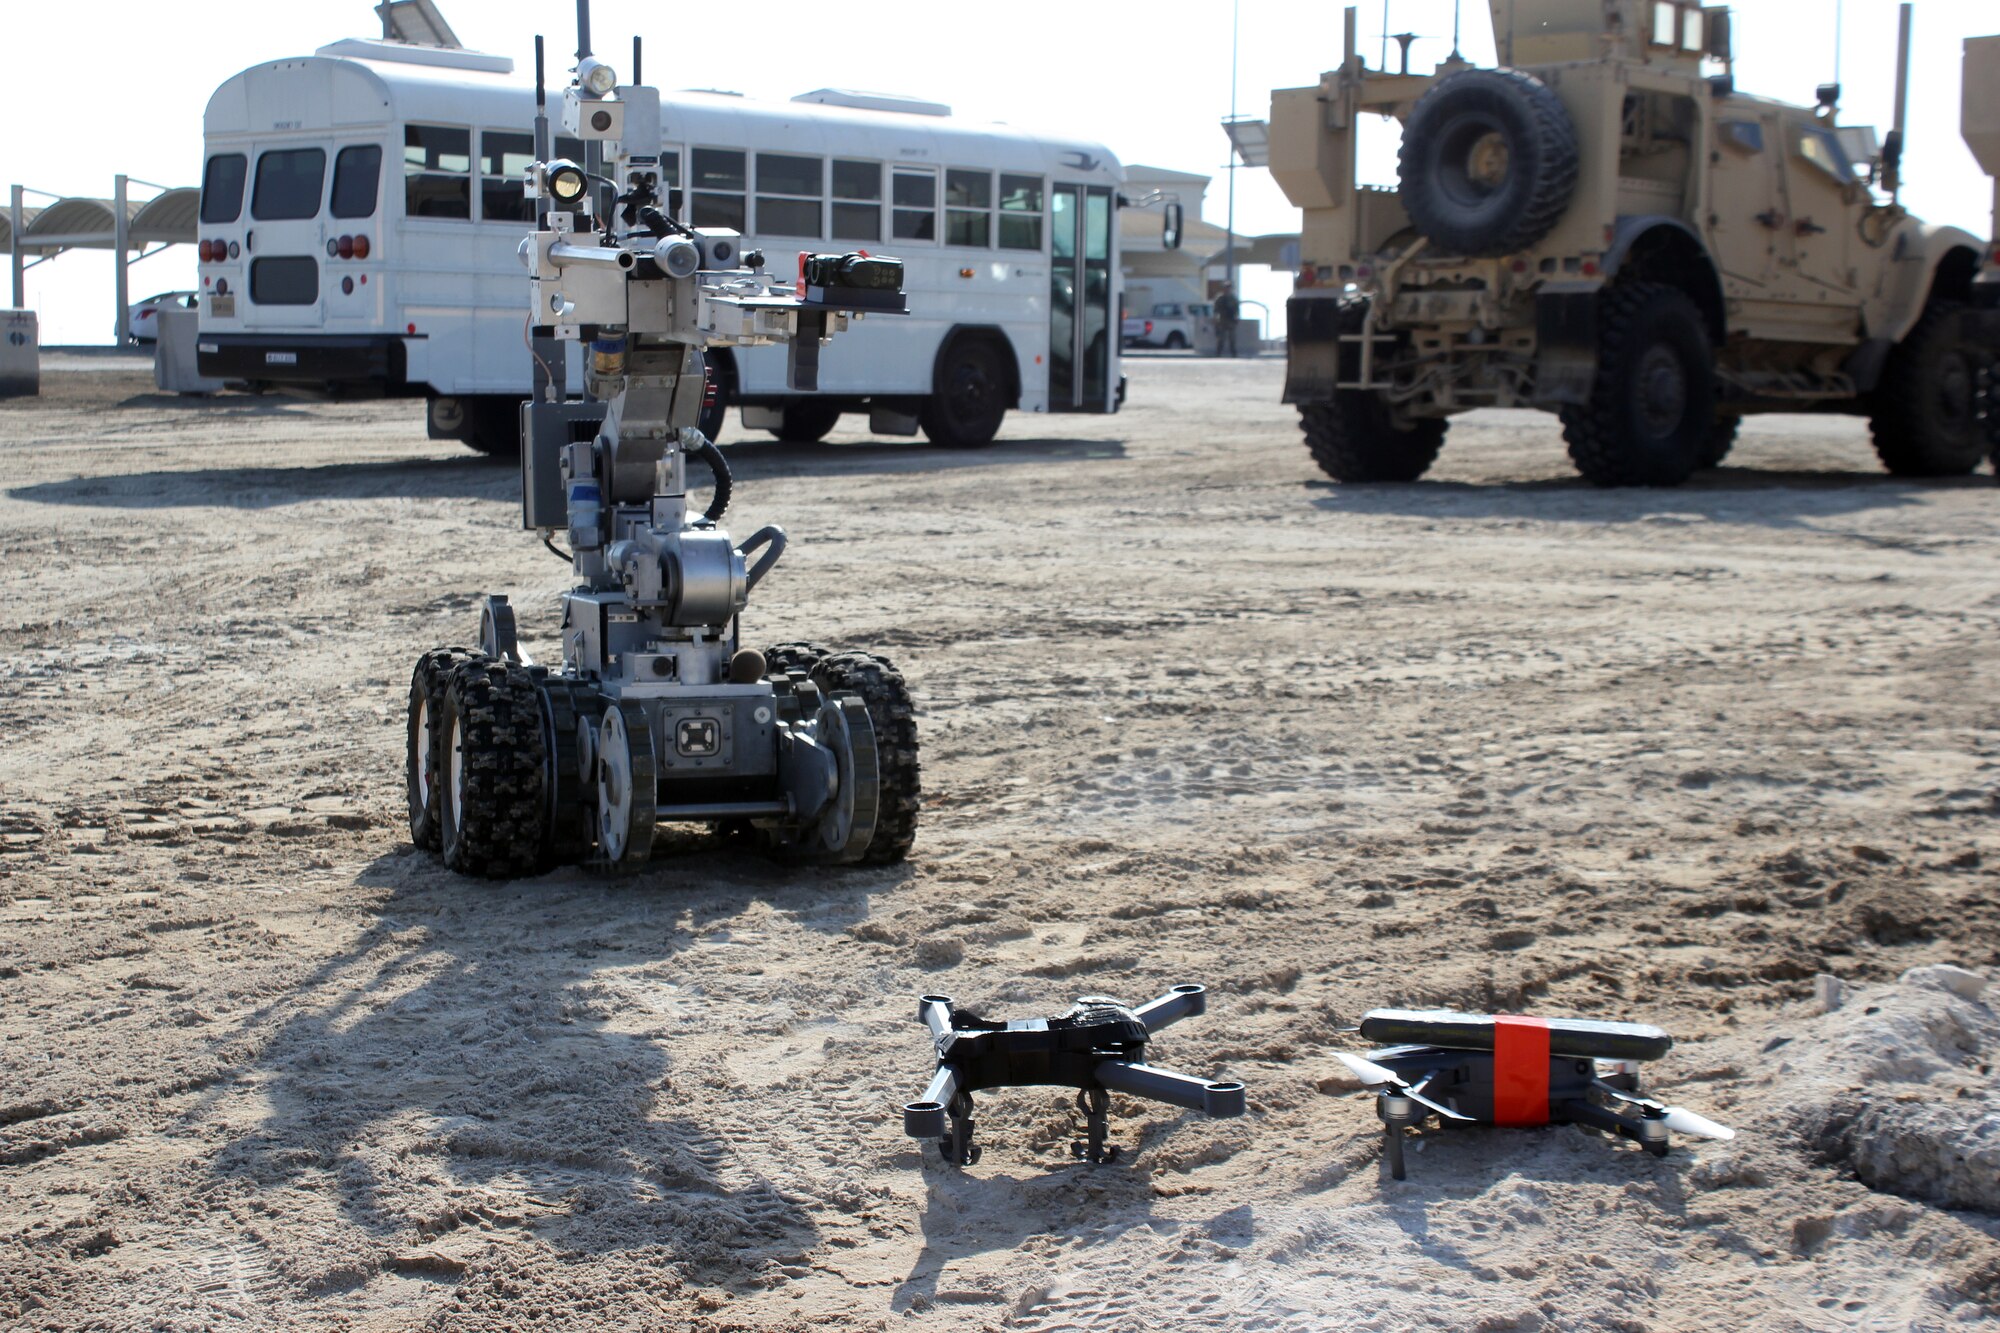 A robot operated by the Explosive Ordnance Disposal team approaches two downed Unmanned Aerial Systems, armed with a simulated explosive device, during an exercise at Al Dhafra Air Base, United Arab Emirates, Dec. 3, 2021. The 380th Expeditionary Security Forces Squadron at the base has responsibility for countering potential UAS threats.